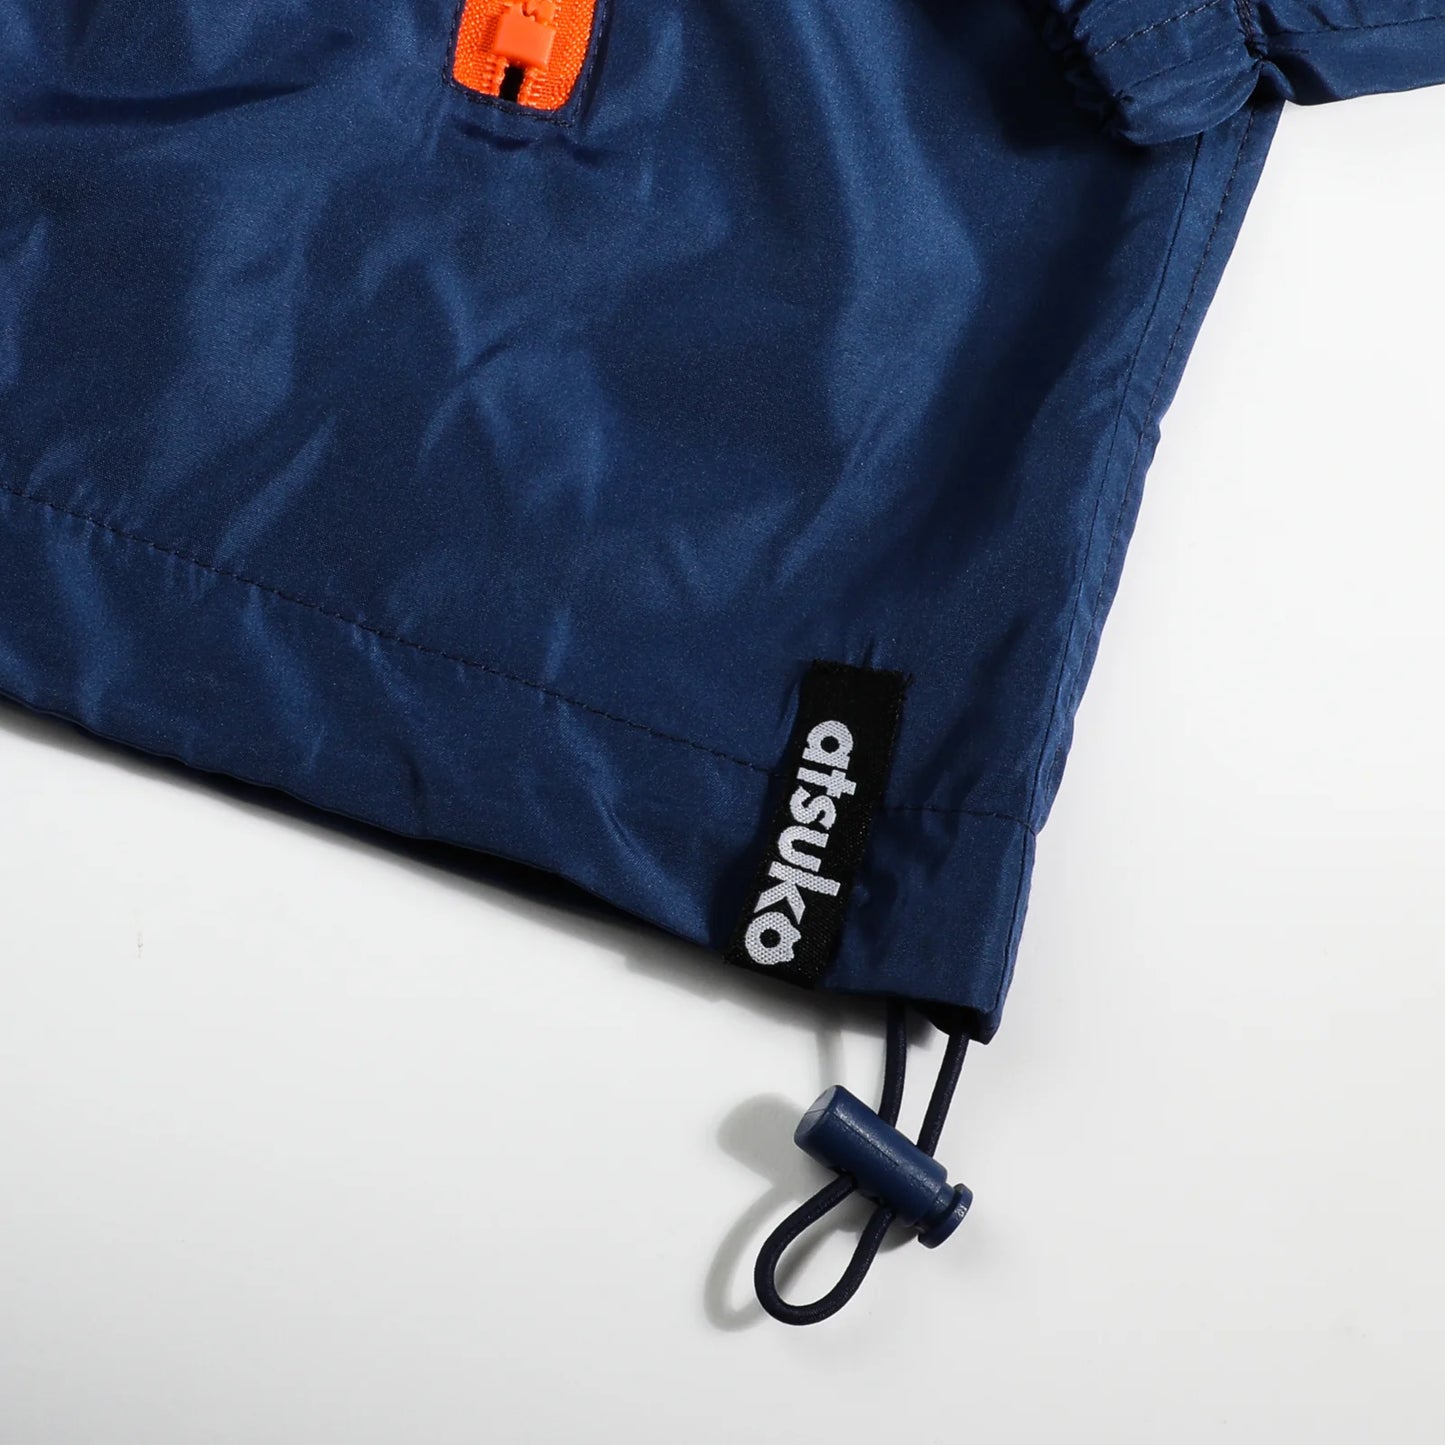 Naruto - Blue Packable Anorak